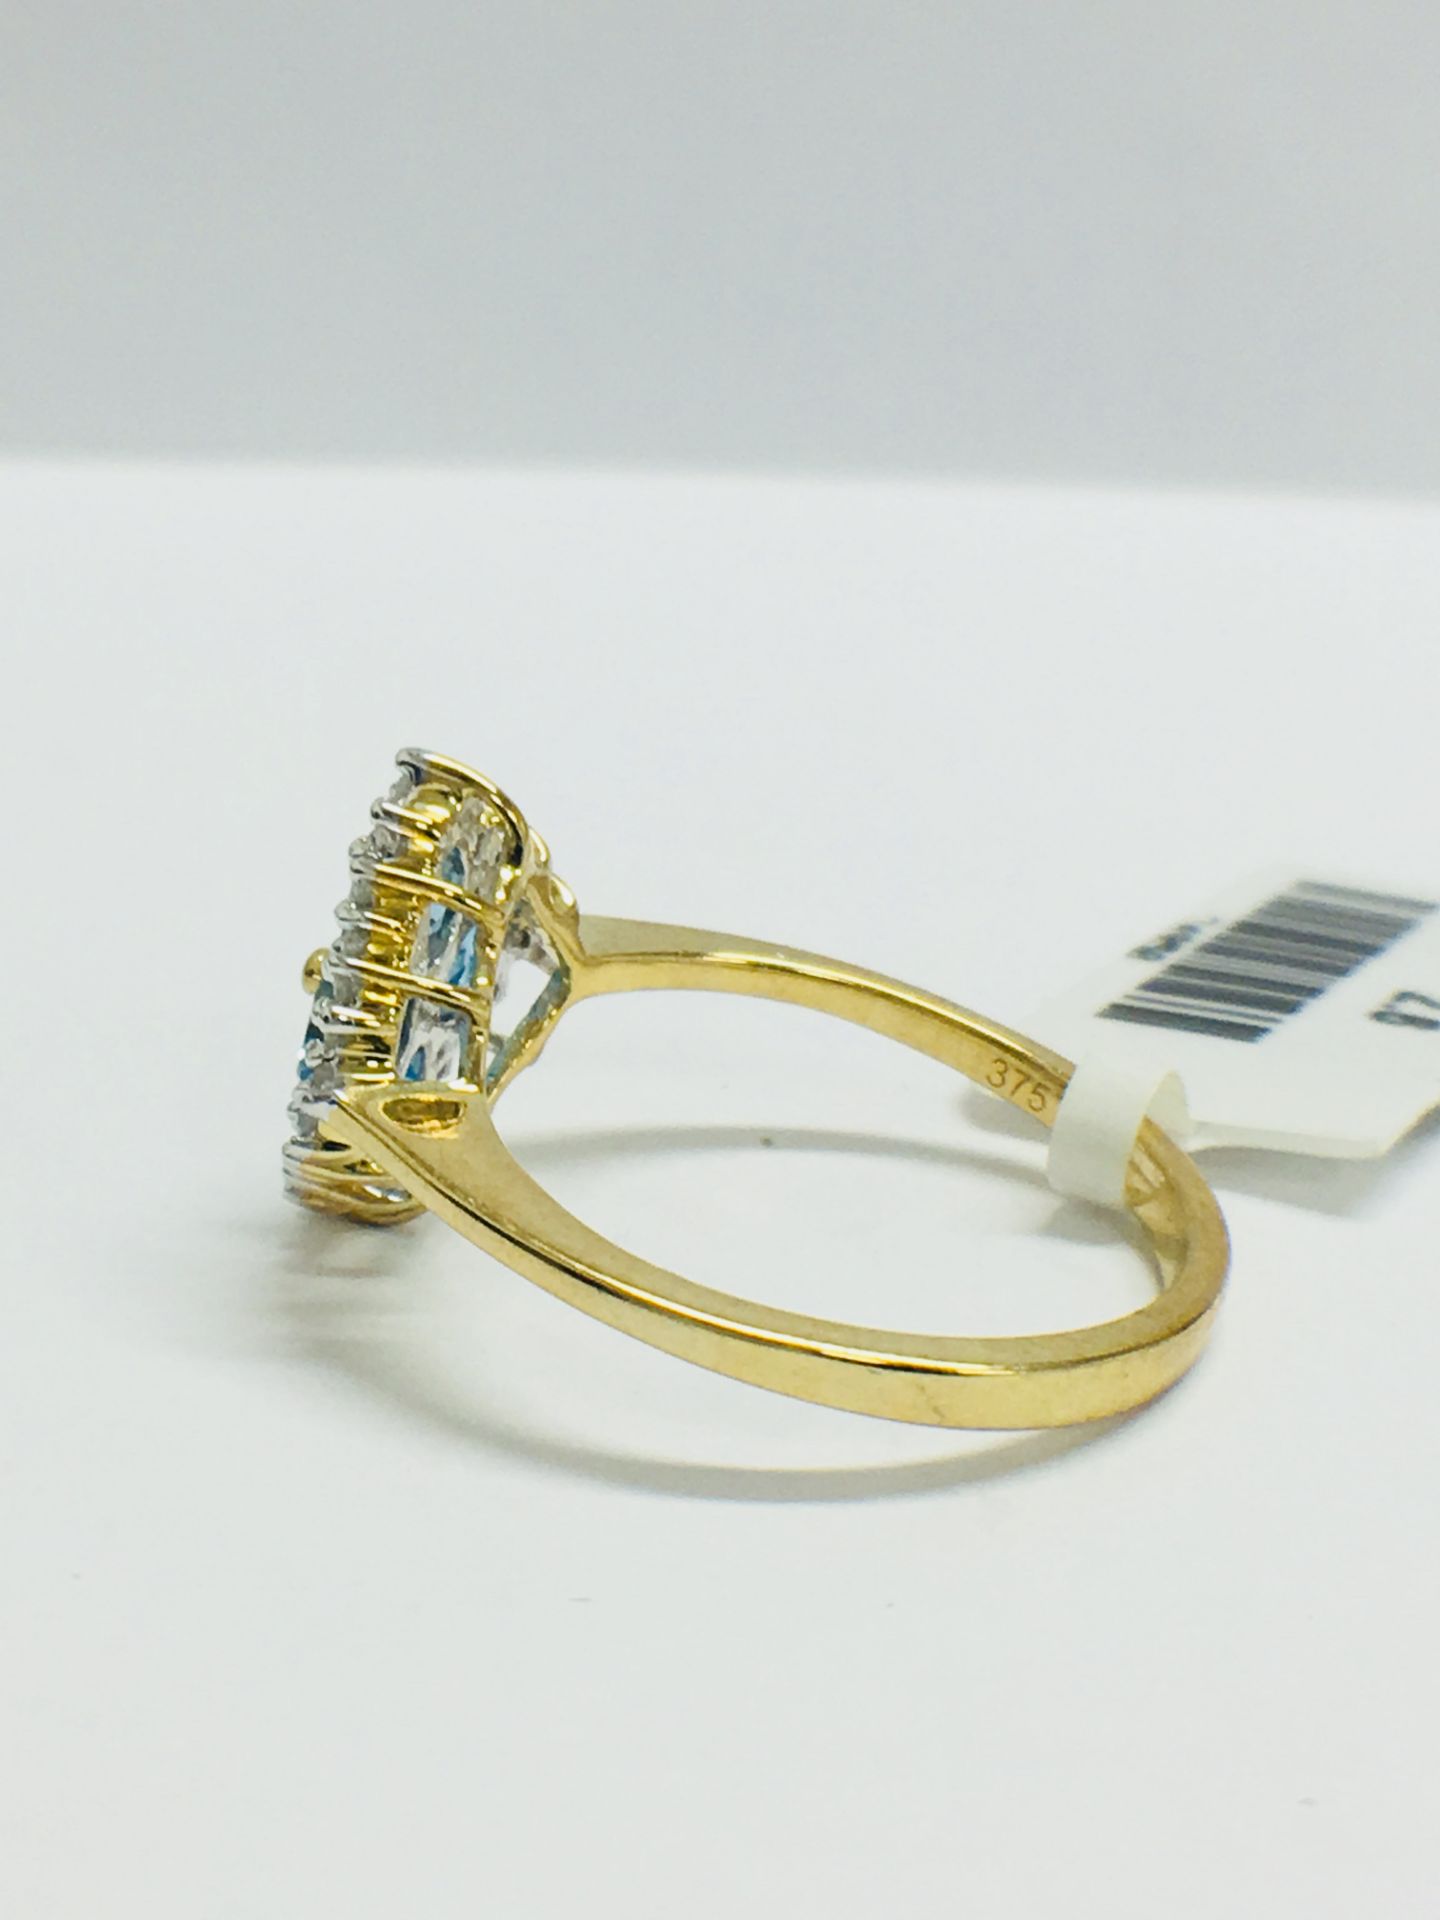 9Ct Yellow Gold Blue Topaz Diamond Cluster Ring - Image 4 of 9